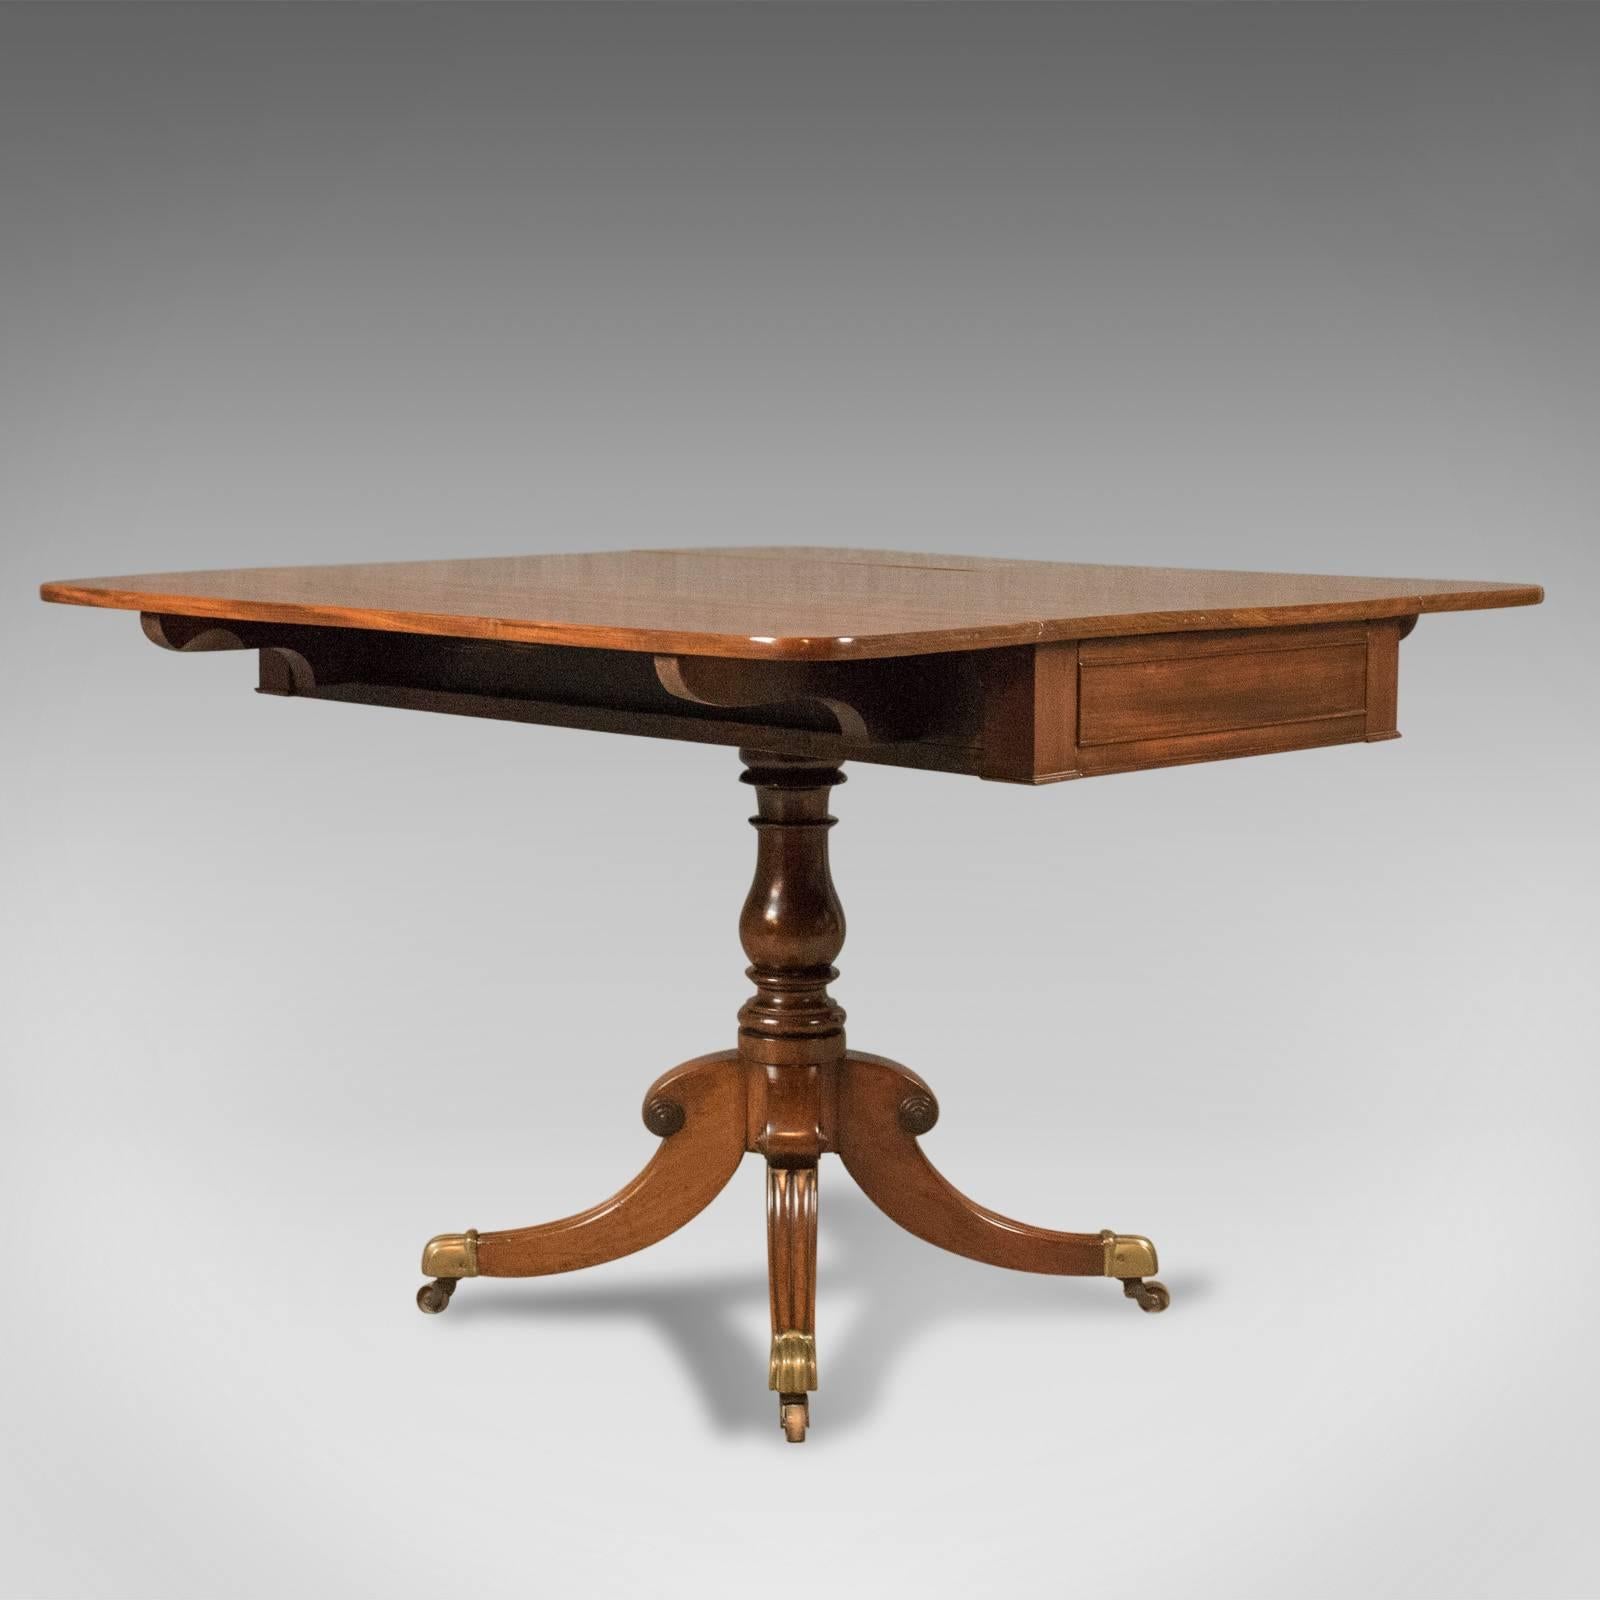 This is a superior quality antique Pembroke table, English, from the Regency period in flame mahogany, circa 1820.

Solid mahogany top in first class order
Displaying grain interest, good colour and a desirable aged patina
Generous proportions